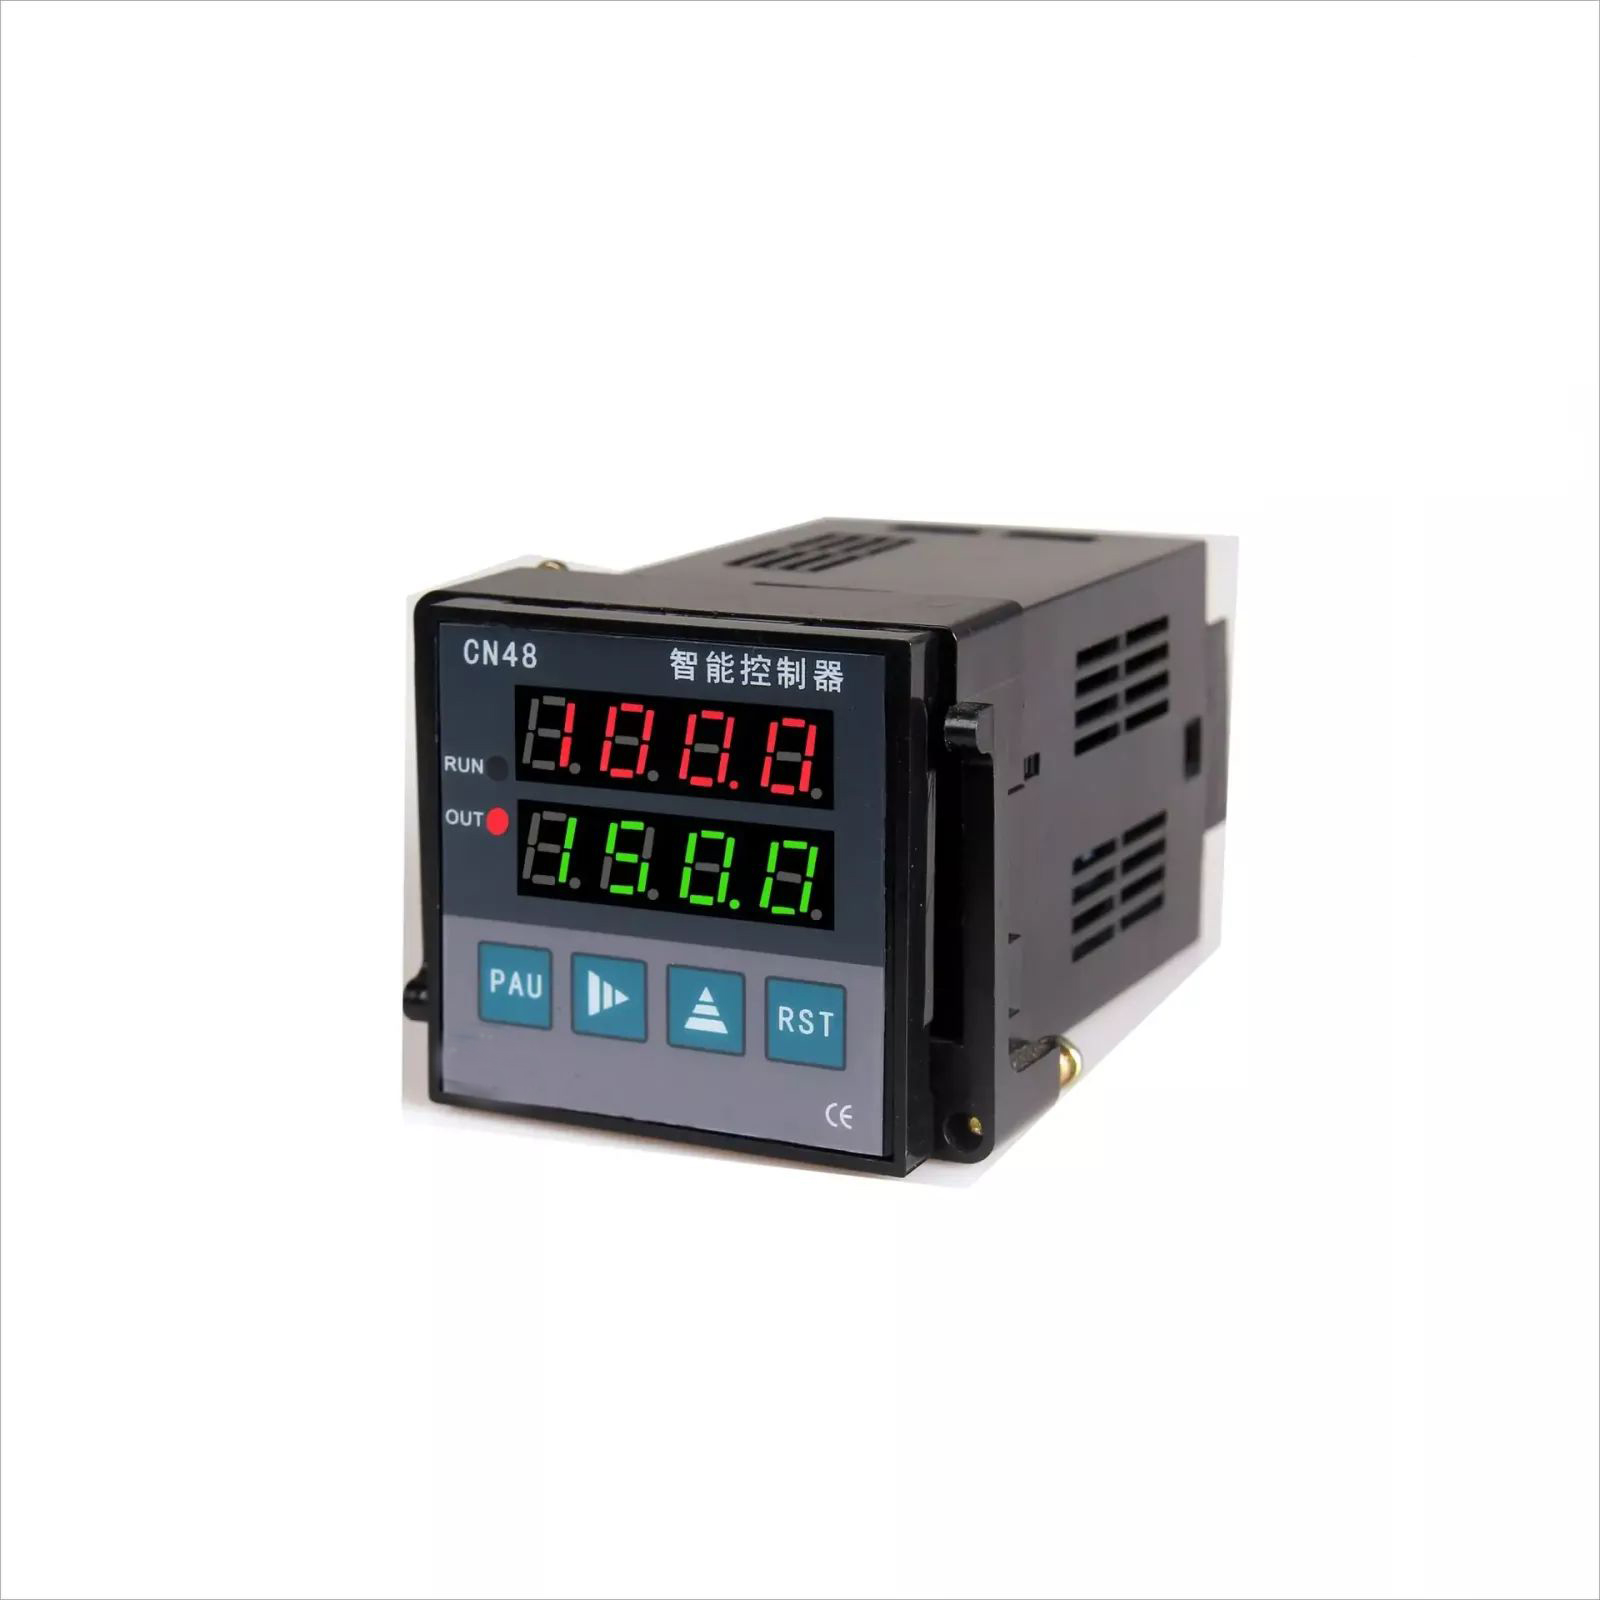 Digital frequency meter /rpm panel meter / counter /Totalize timer